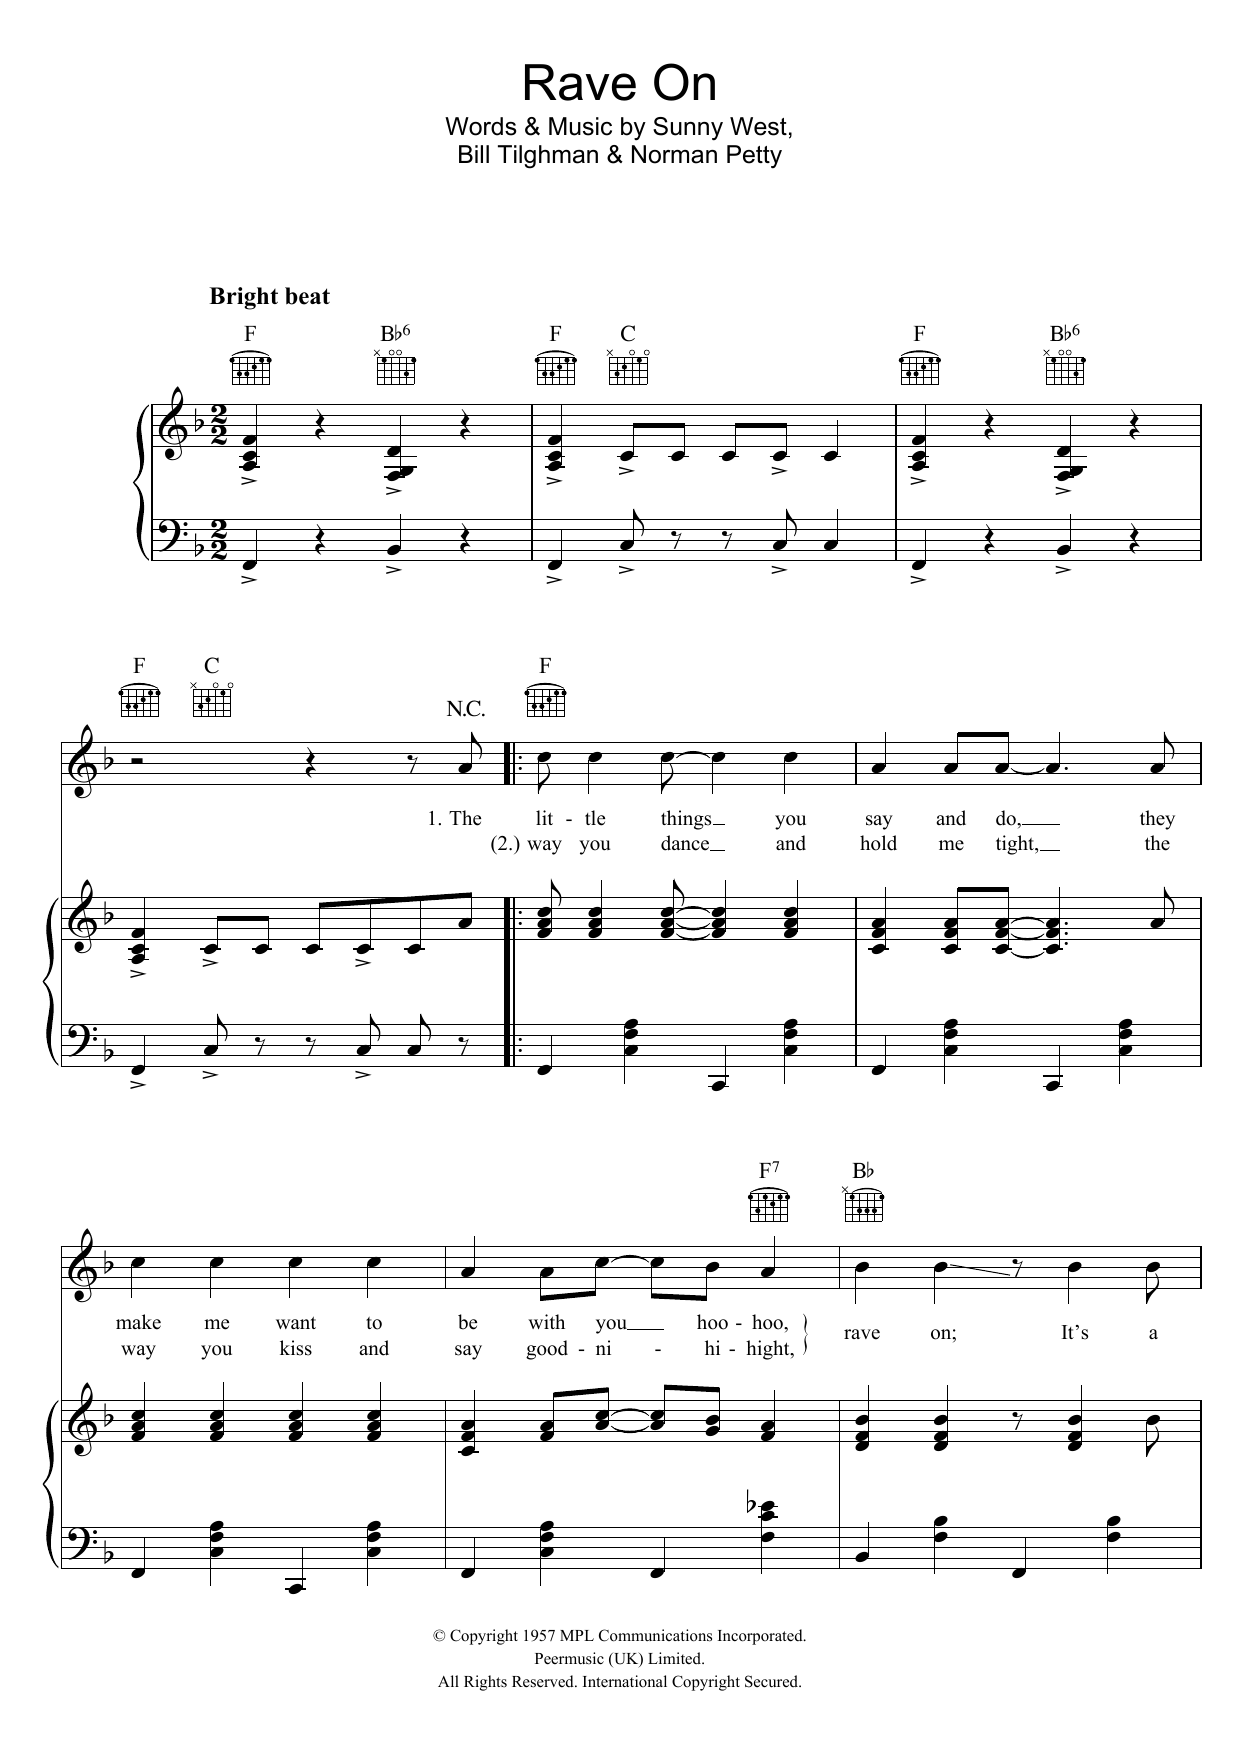 Download Buddy Holly Rave On Sheet Music